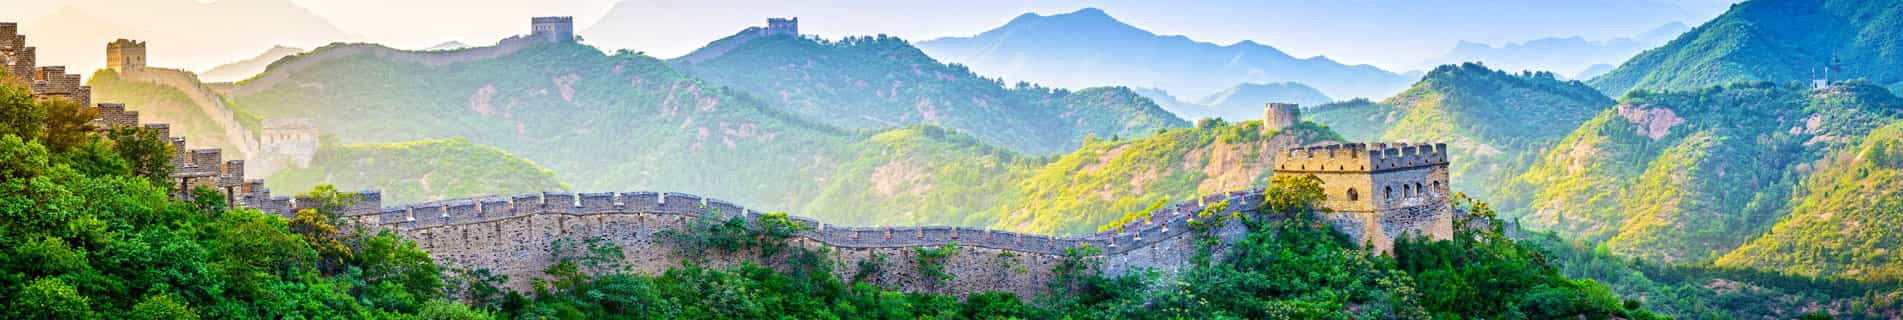 tours great wall of china